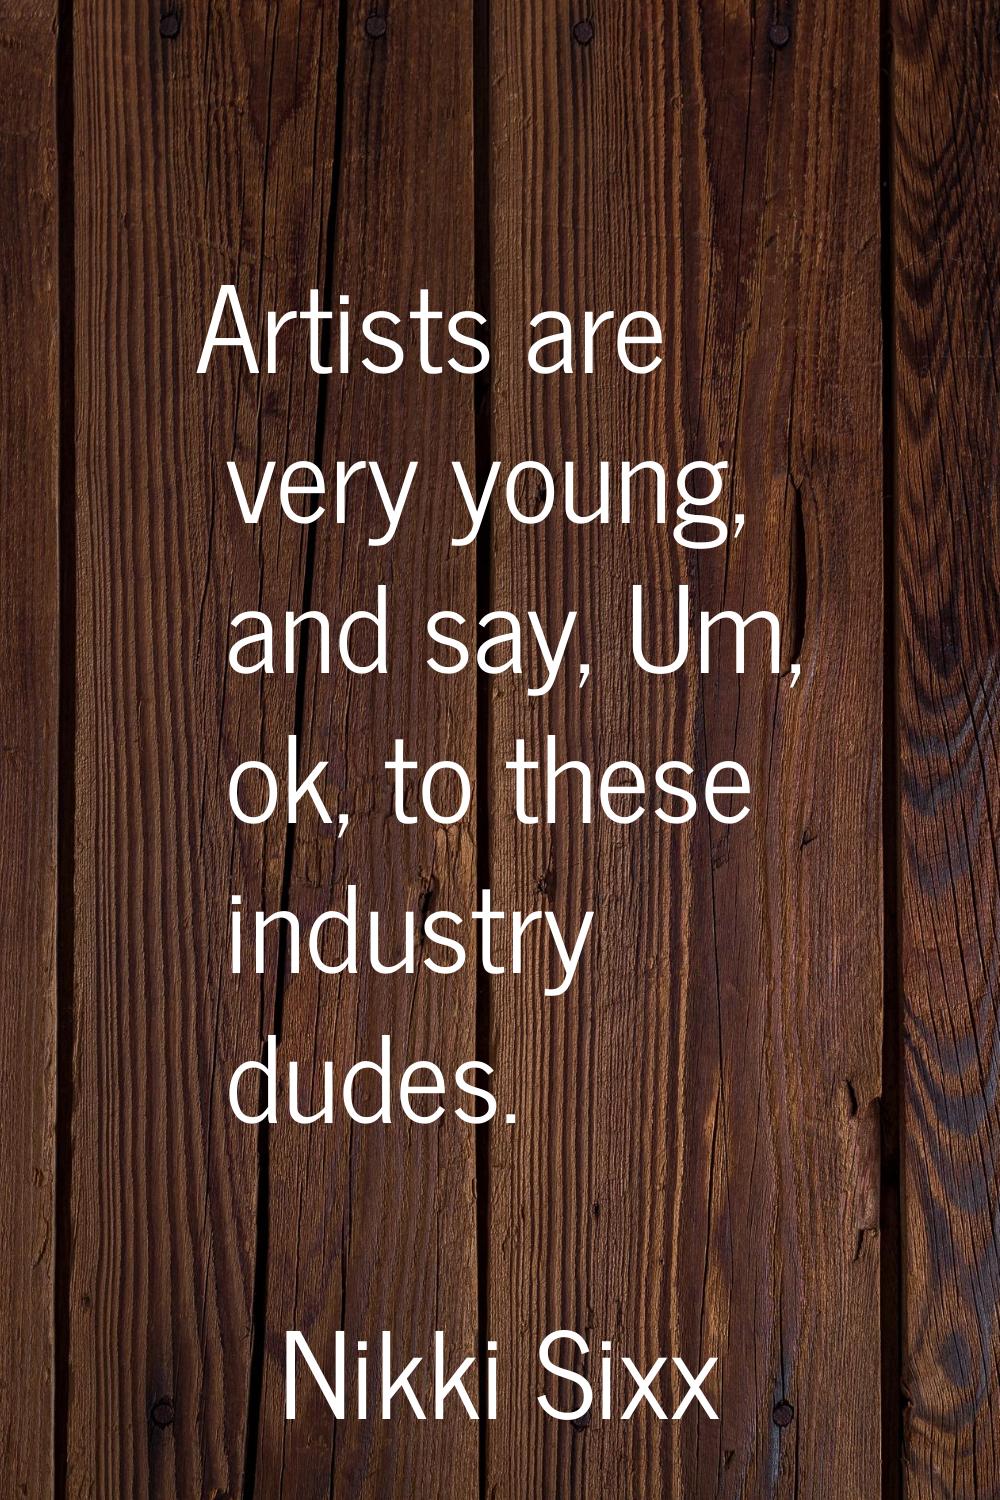 Artists are very young, and say, Um, ok, to these industry dudes.